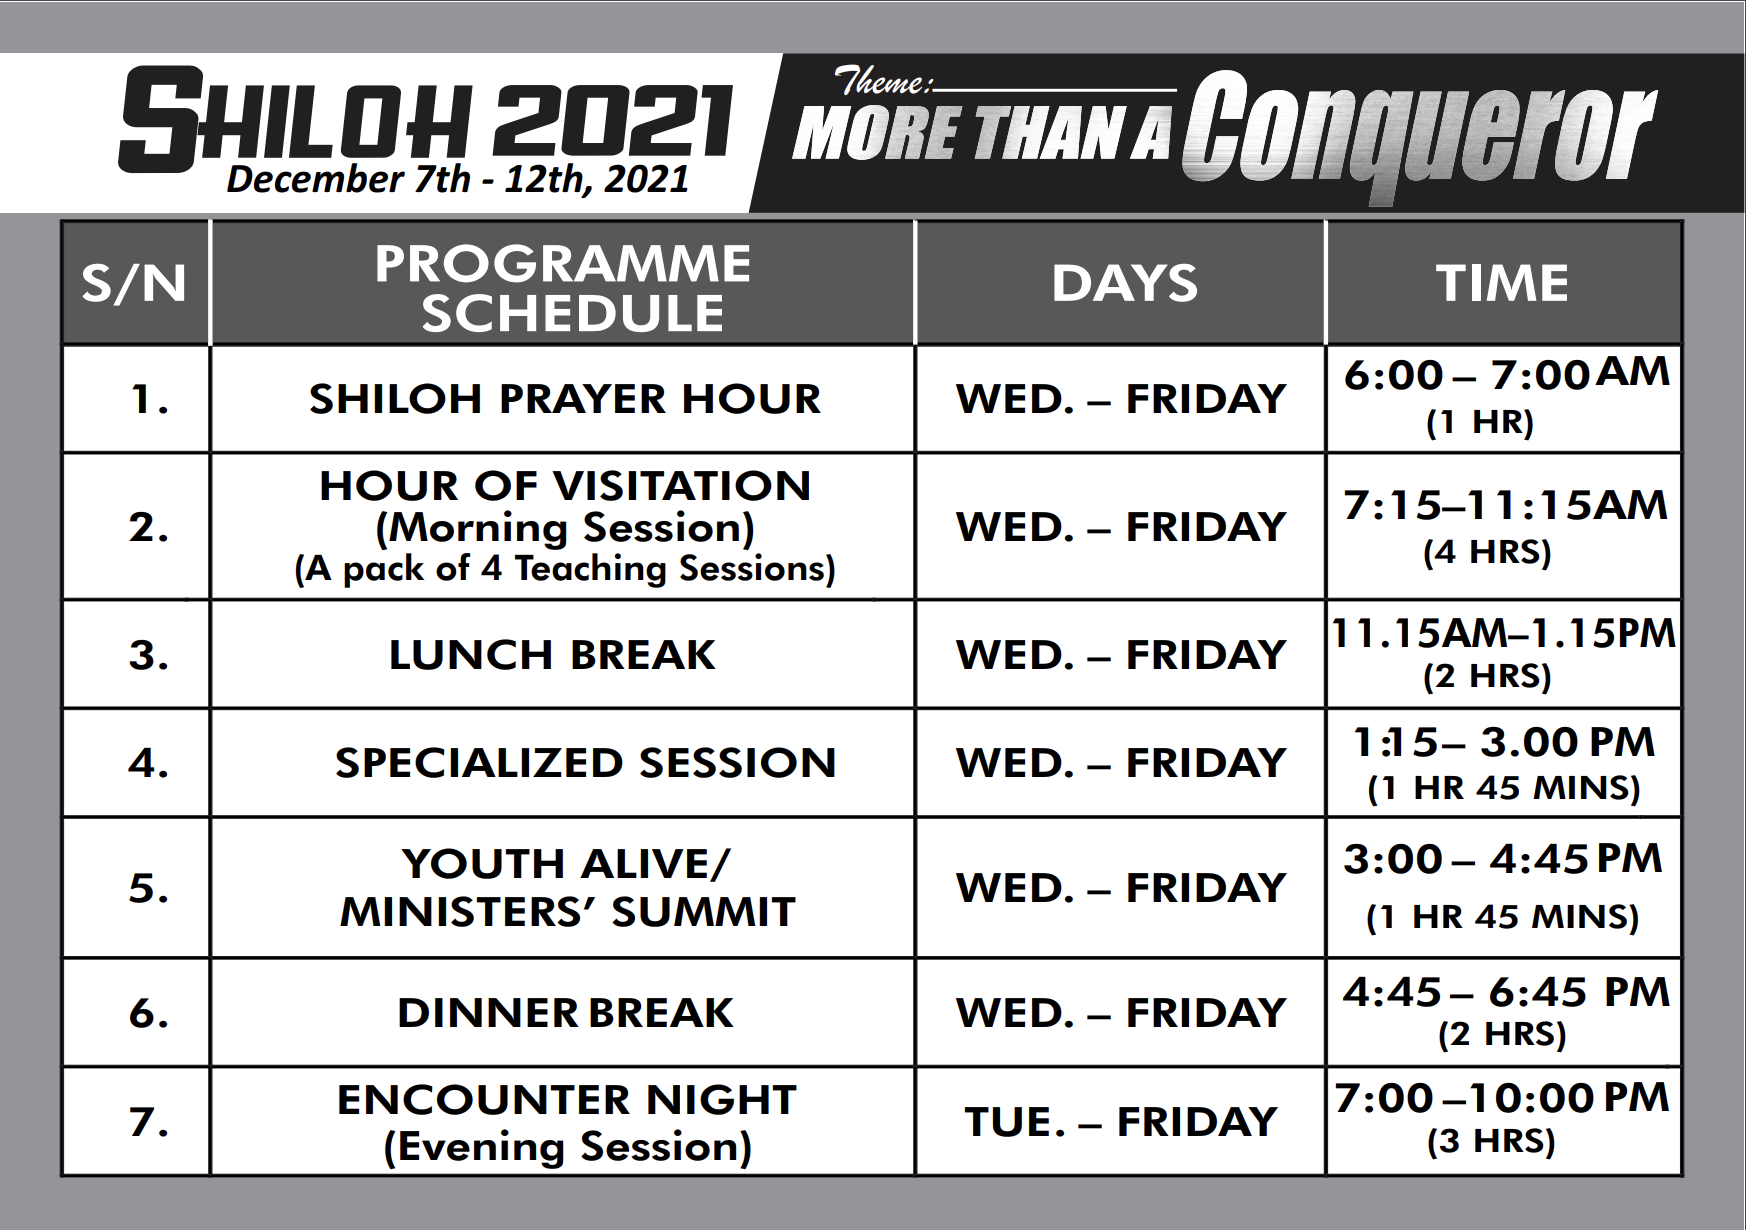 WINNERS CHAPEL SHILOH 2021 DATES, EVENT SCHEDULE, THEME Daily